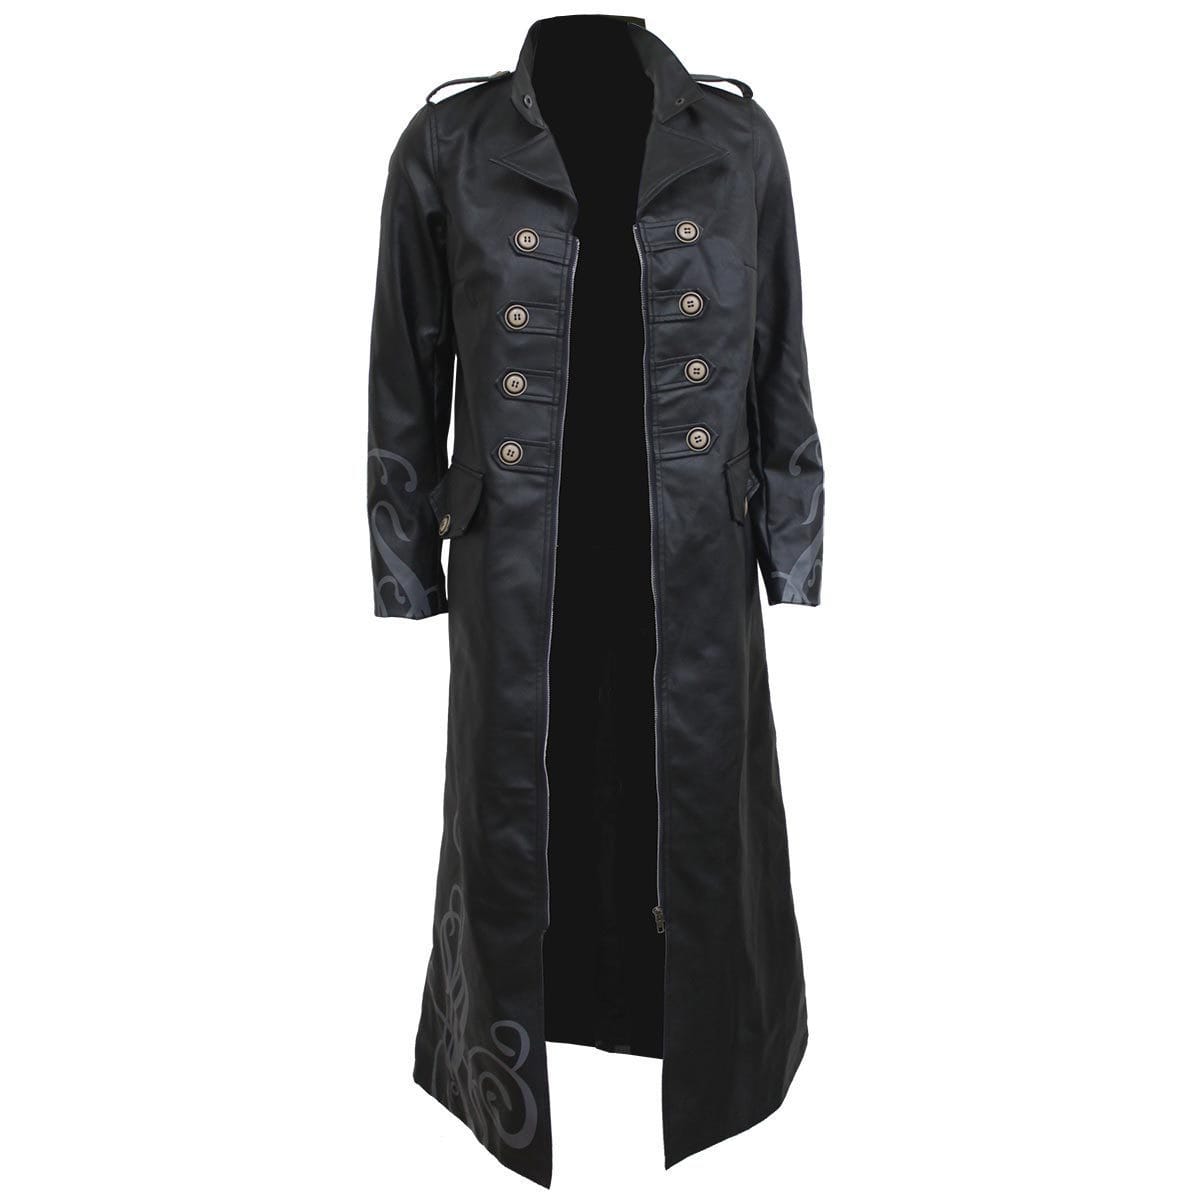 FATAL ATTRACTION - Gothic Trench Coat PU-Leather Corset Back - Spiral USA